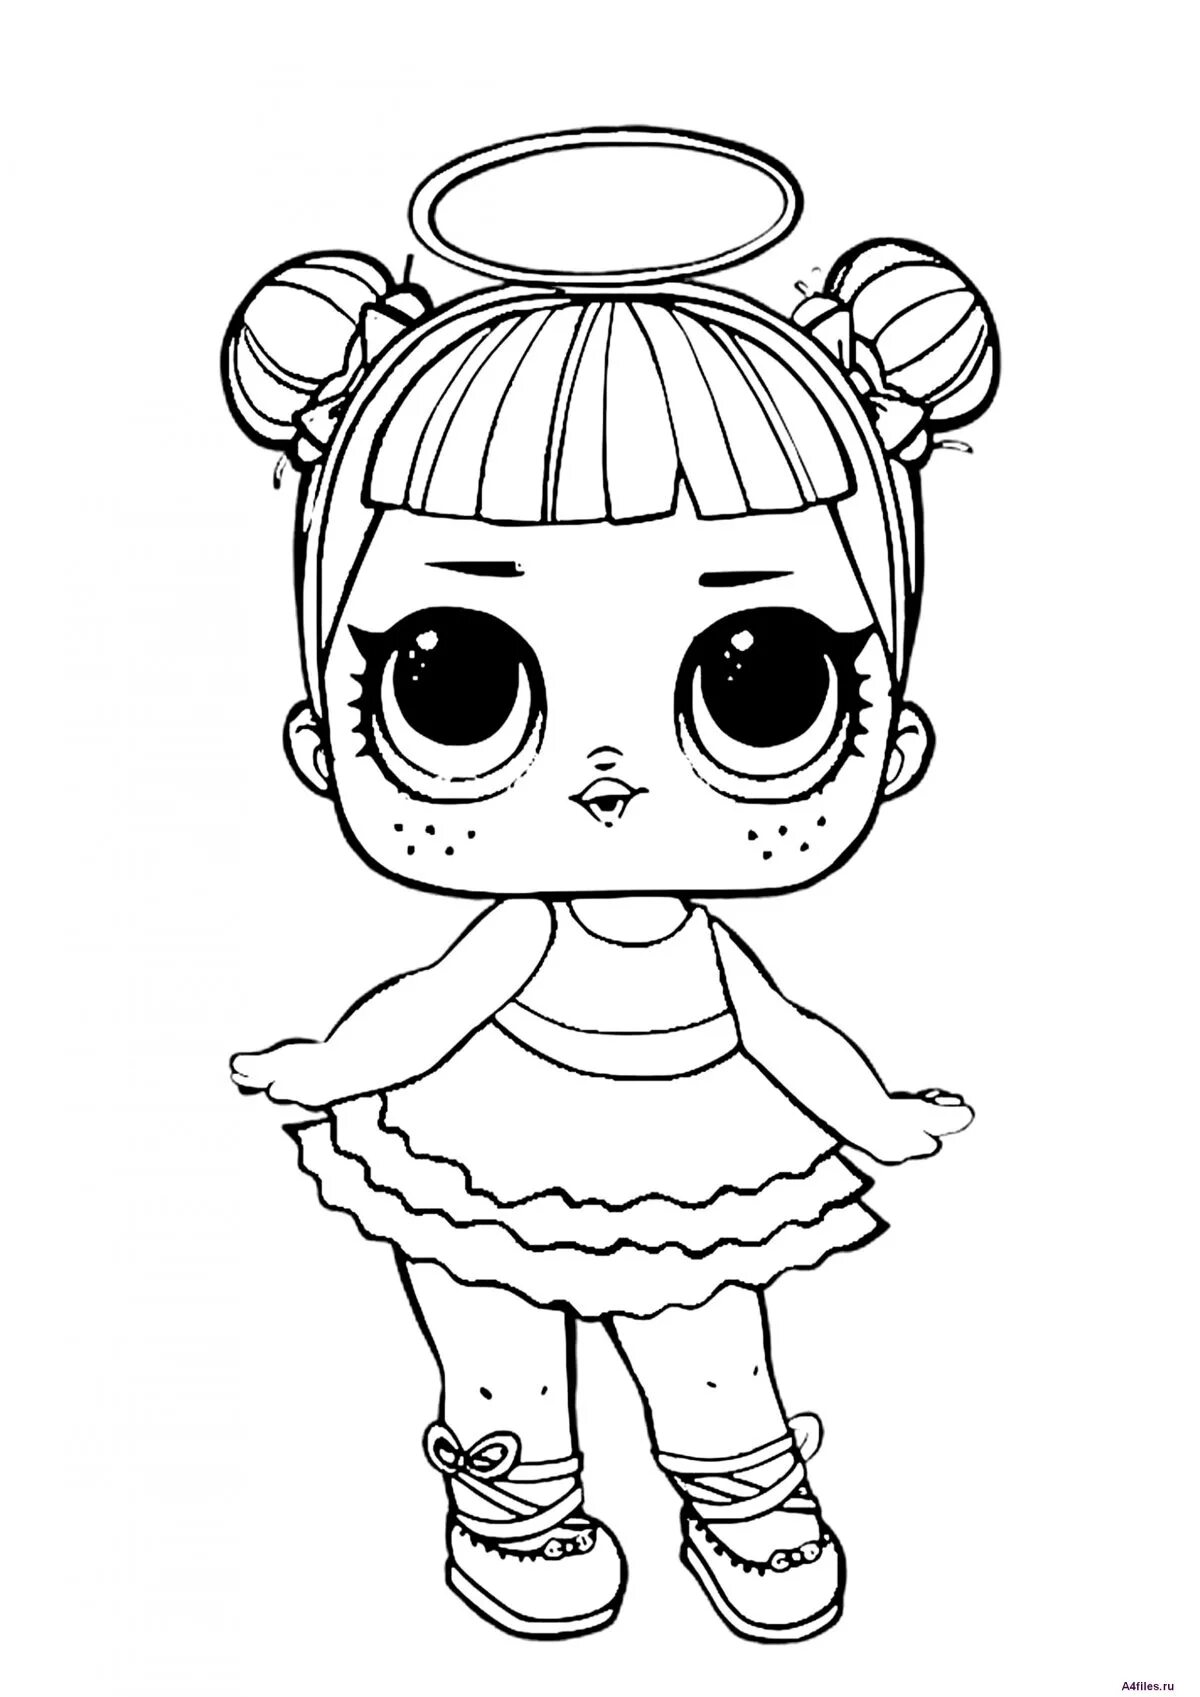 Color-frenzy doll coloring page for children 5-6 years old